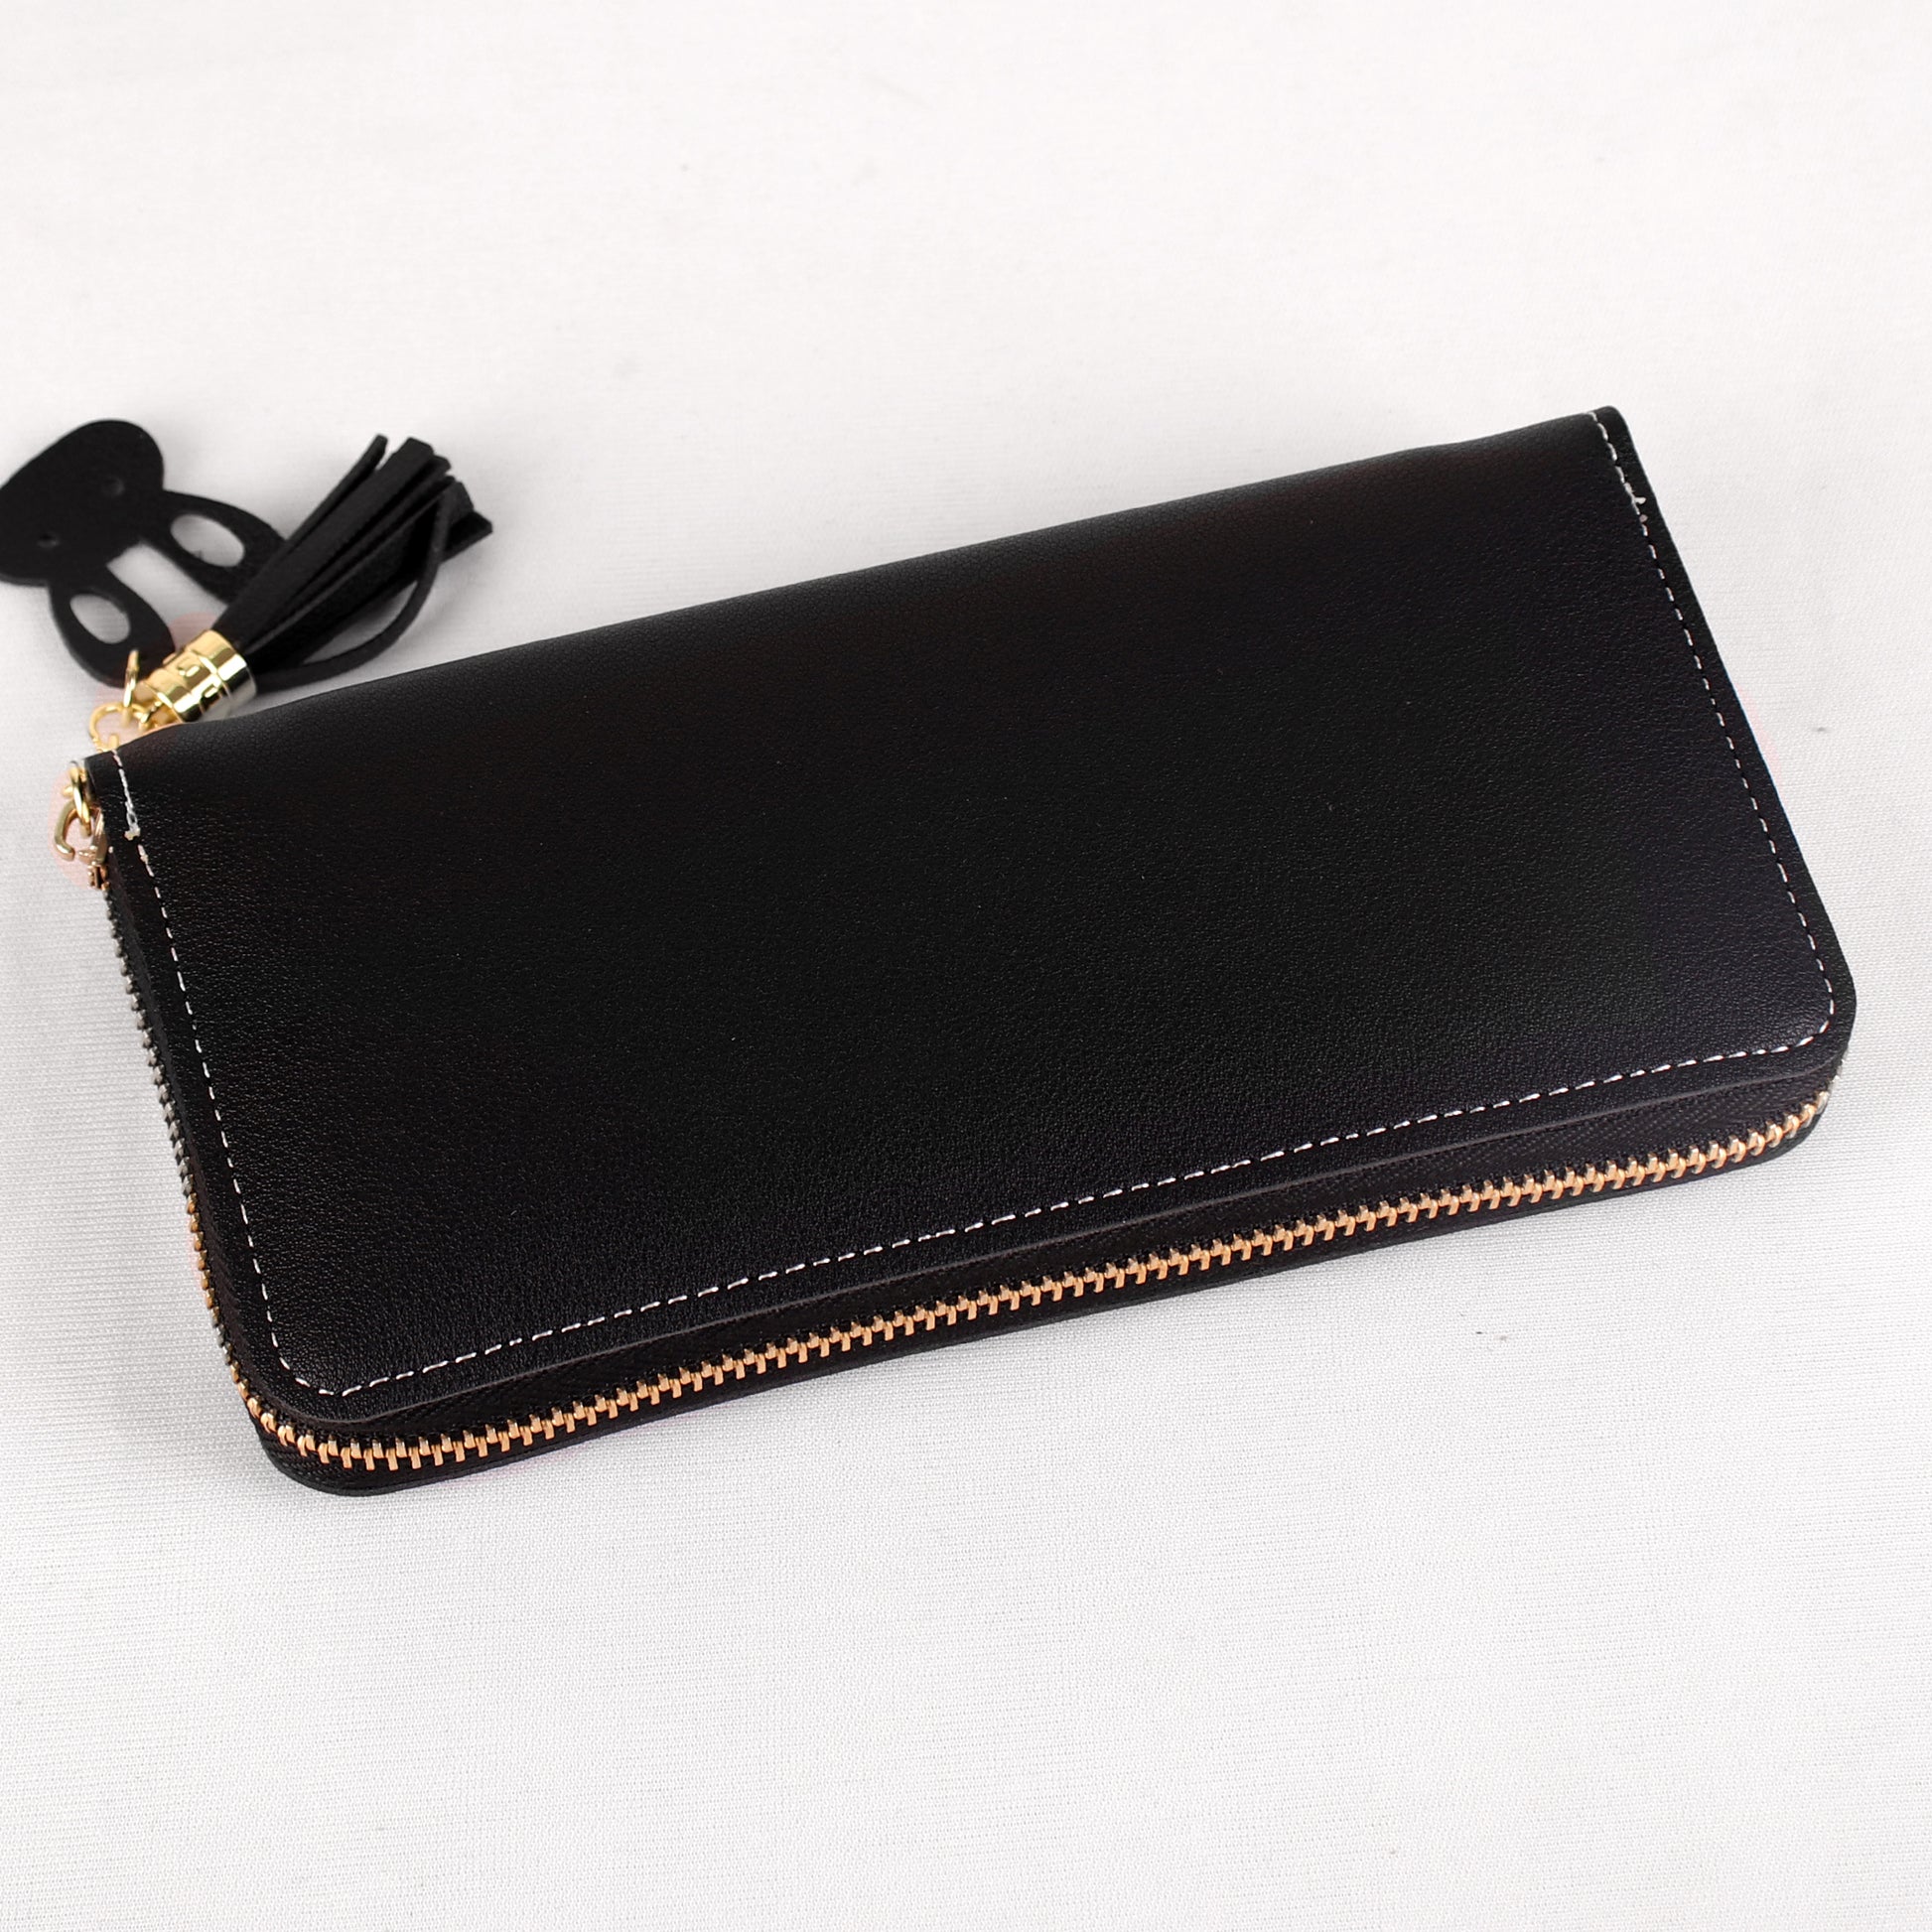 Wallet,The Envelope Wallet in Black & White - Cippele Multi Store